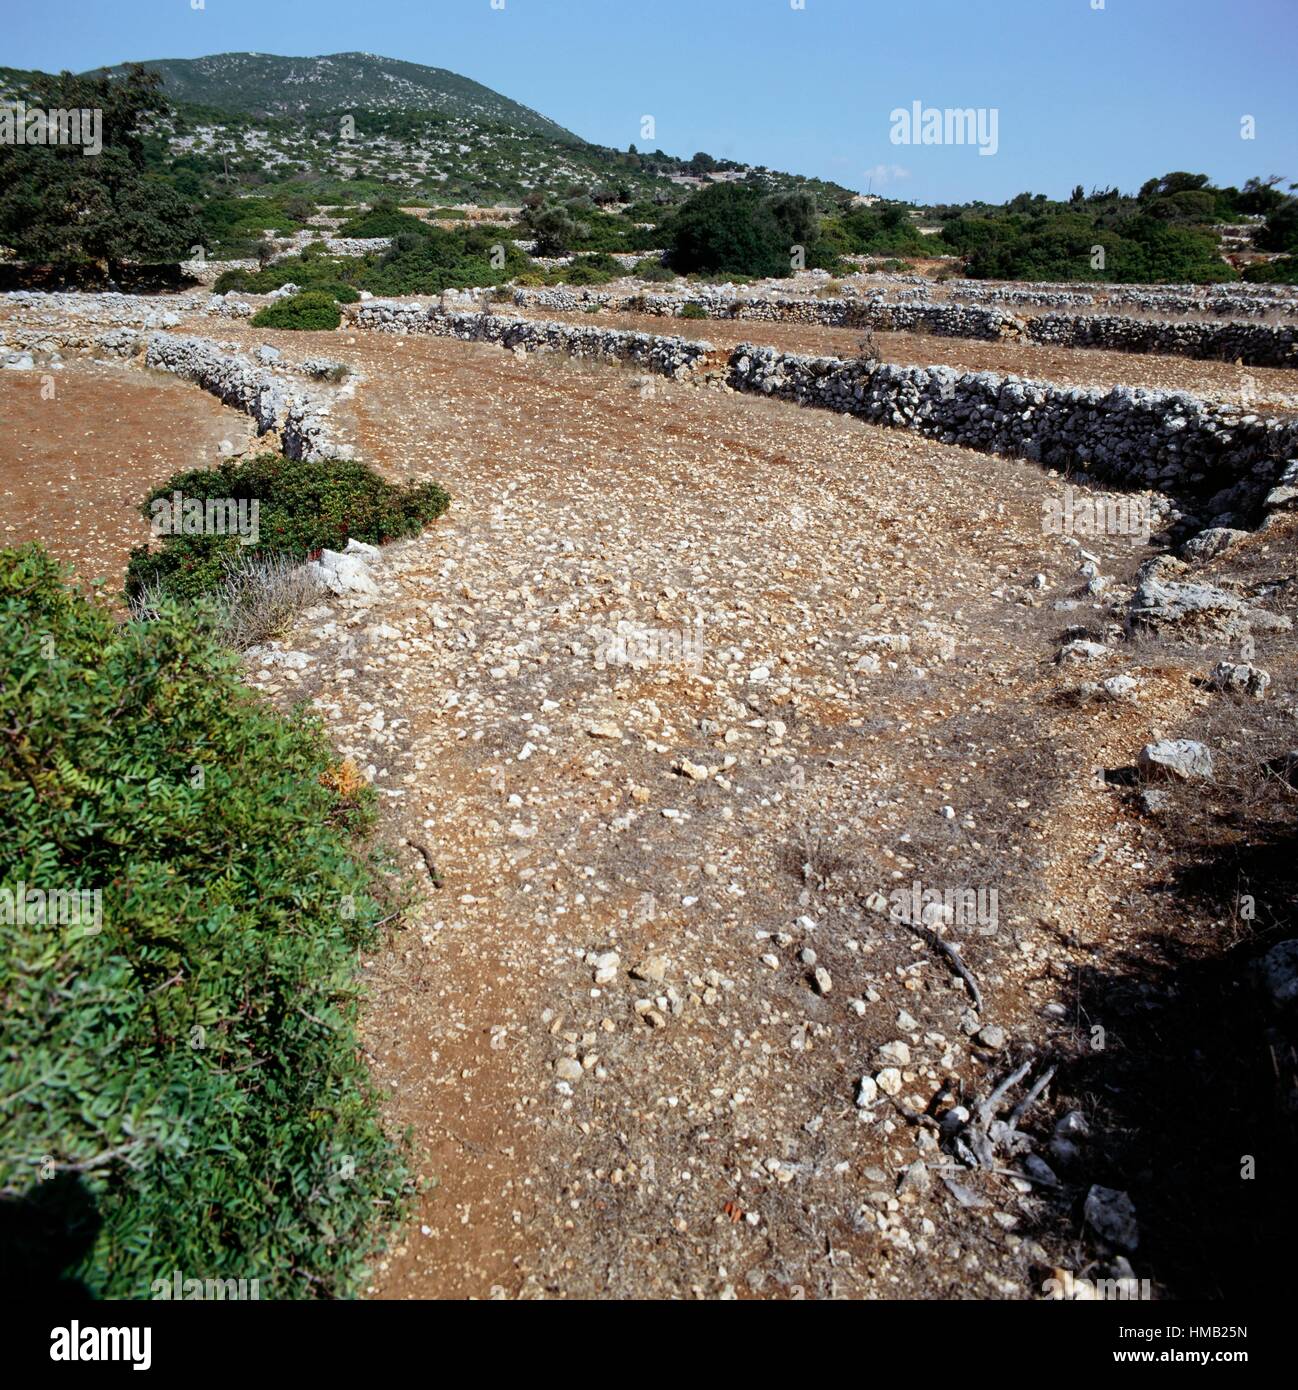 Land plots bounded by dry stone walls, Lefkada island, Ionian islands, Greece. Stock Photo